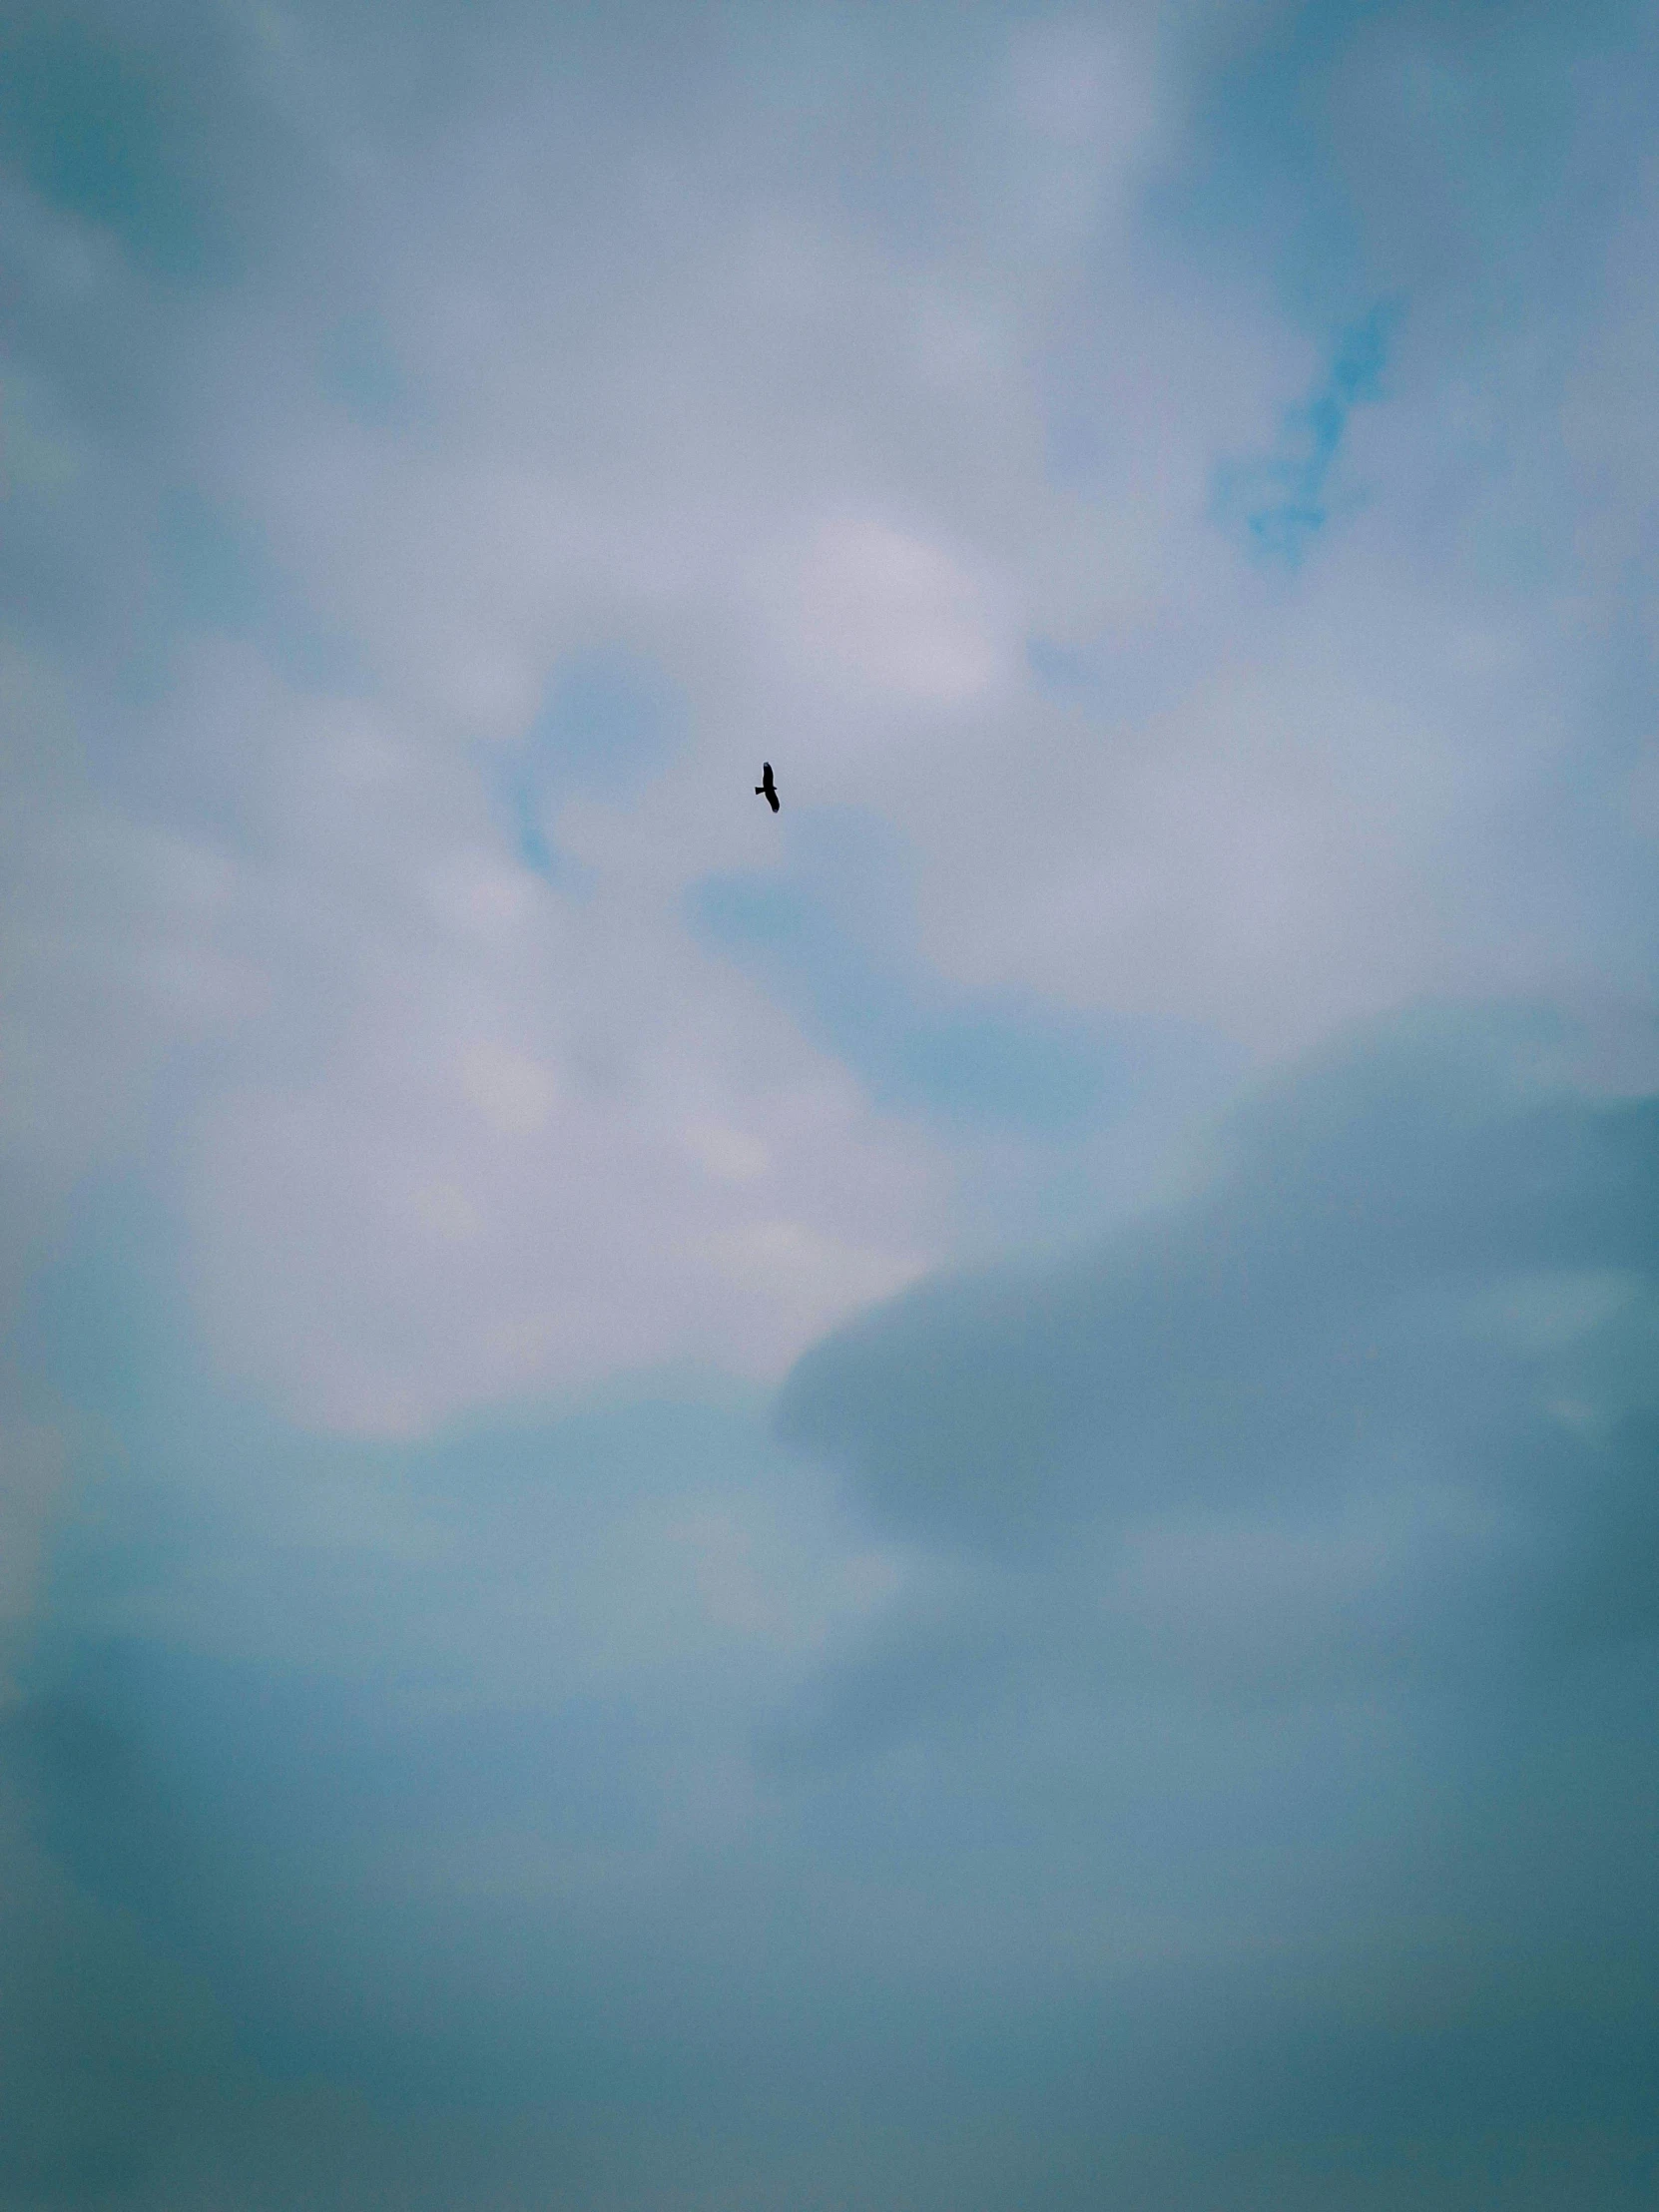 a bird flying on a cloudy day in a cloudy sky